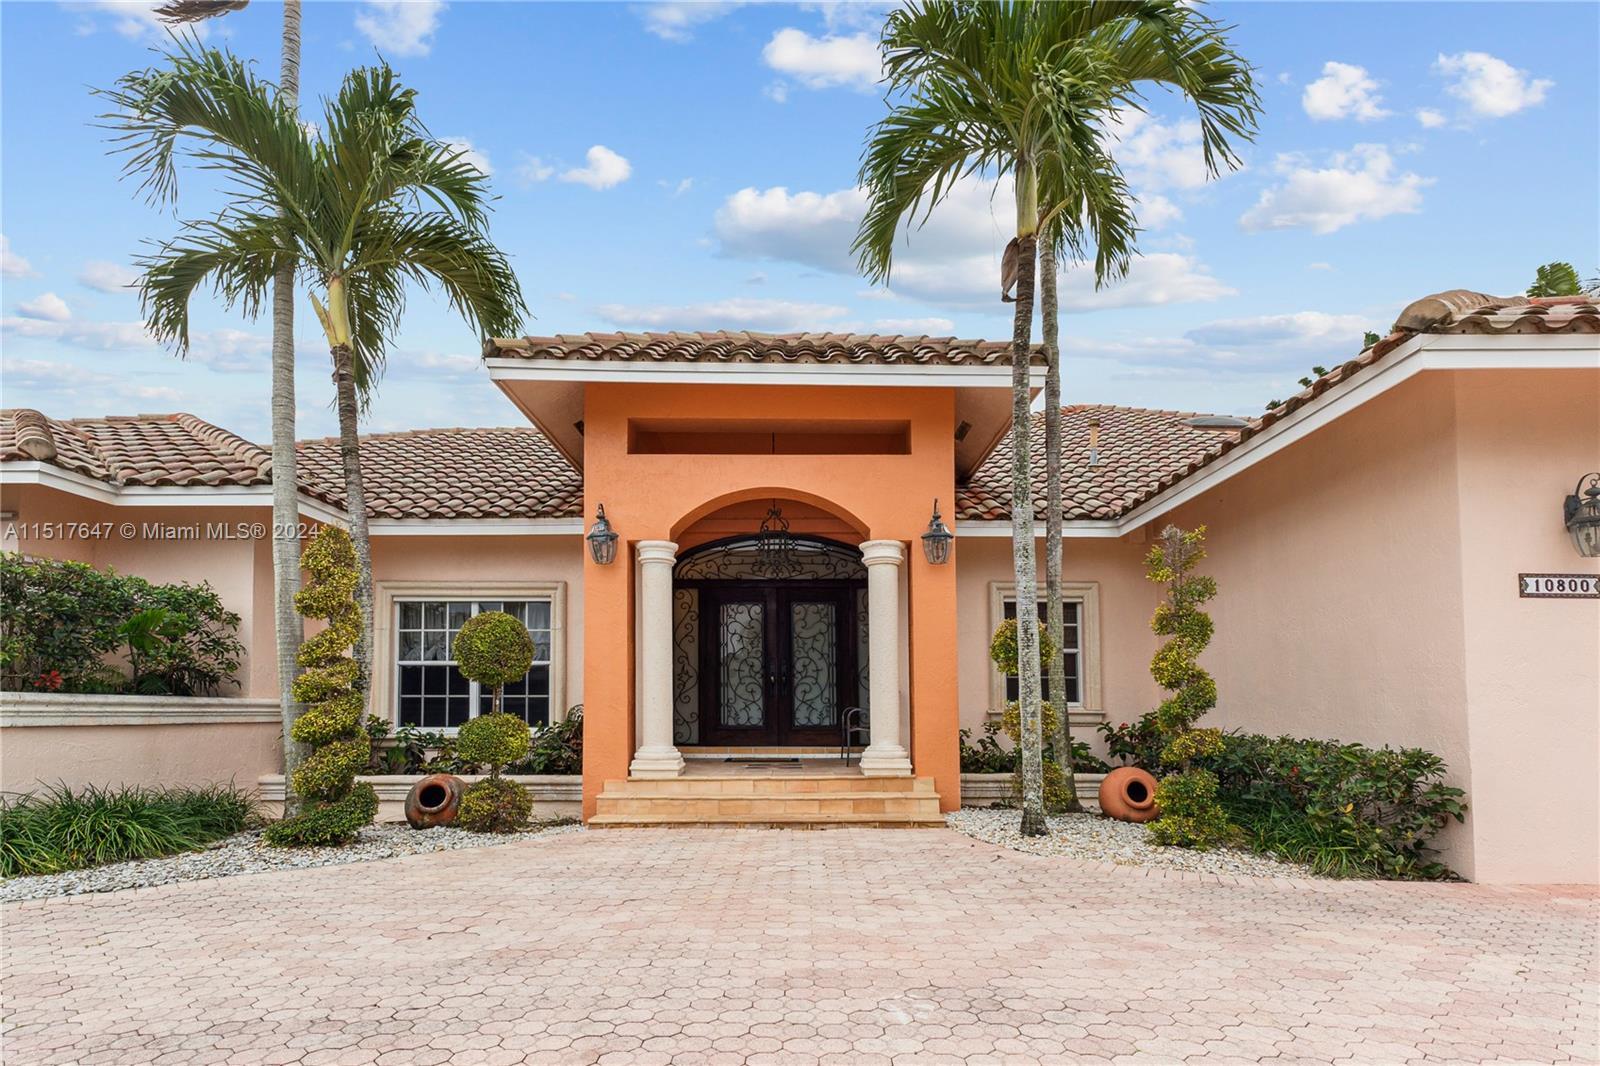 Experience Miami living in this magnificent 5 bed + loft, 4 bath residence. This corner lot home is 